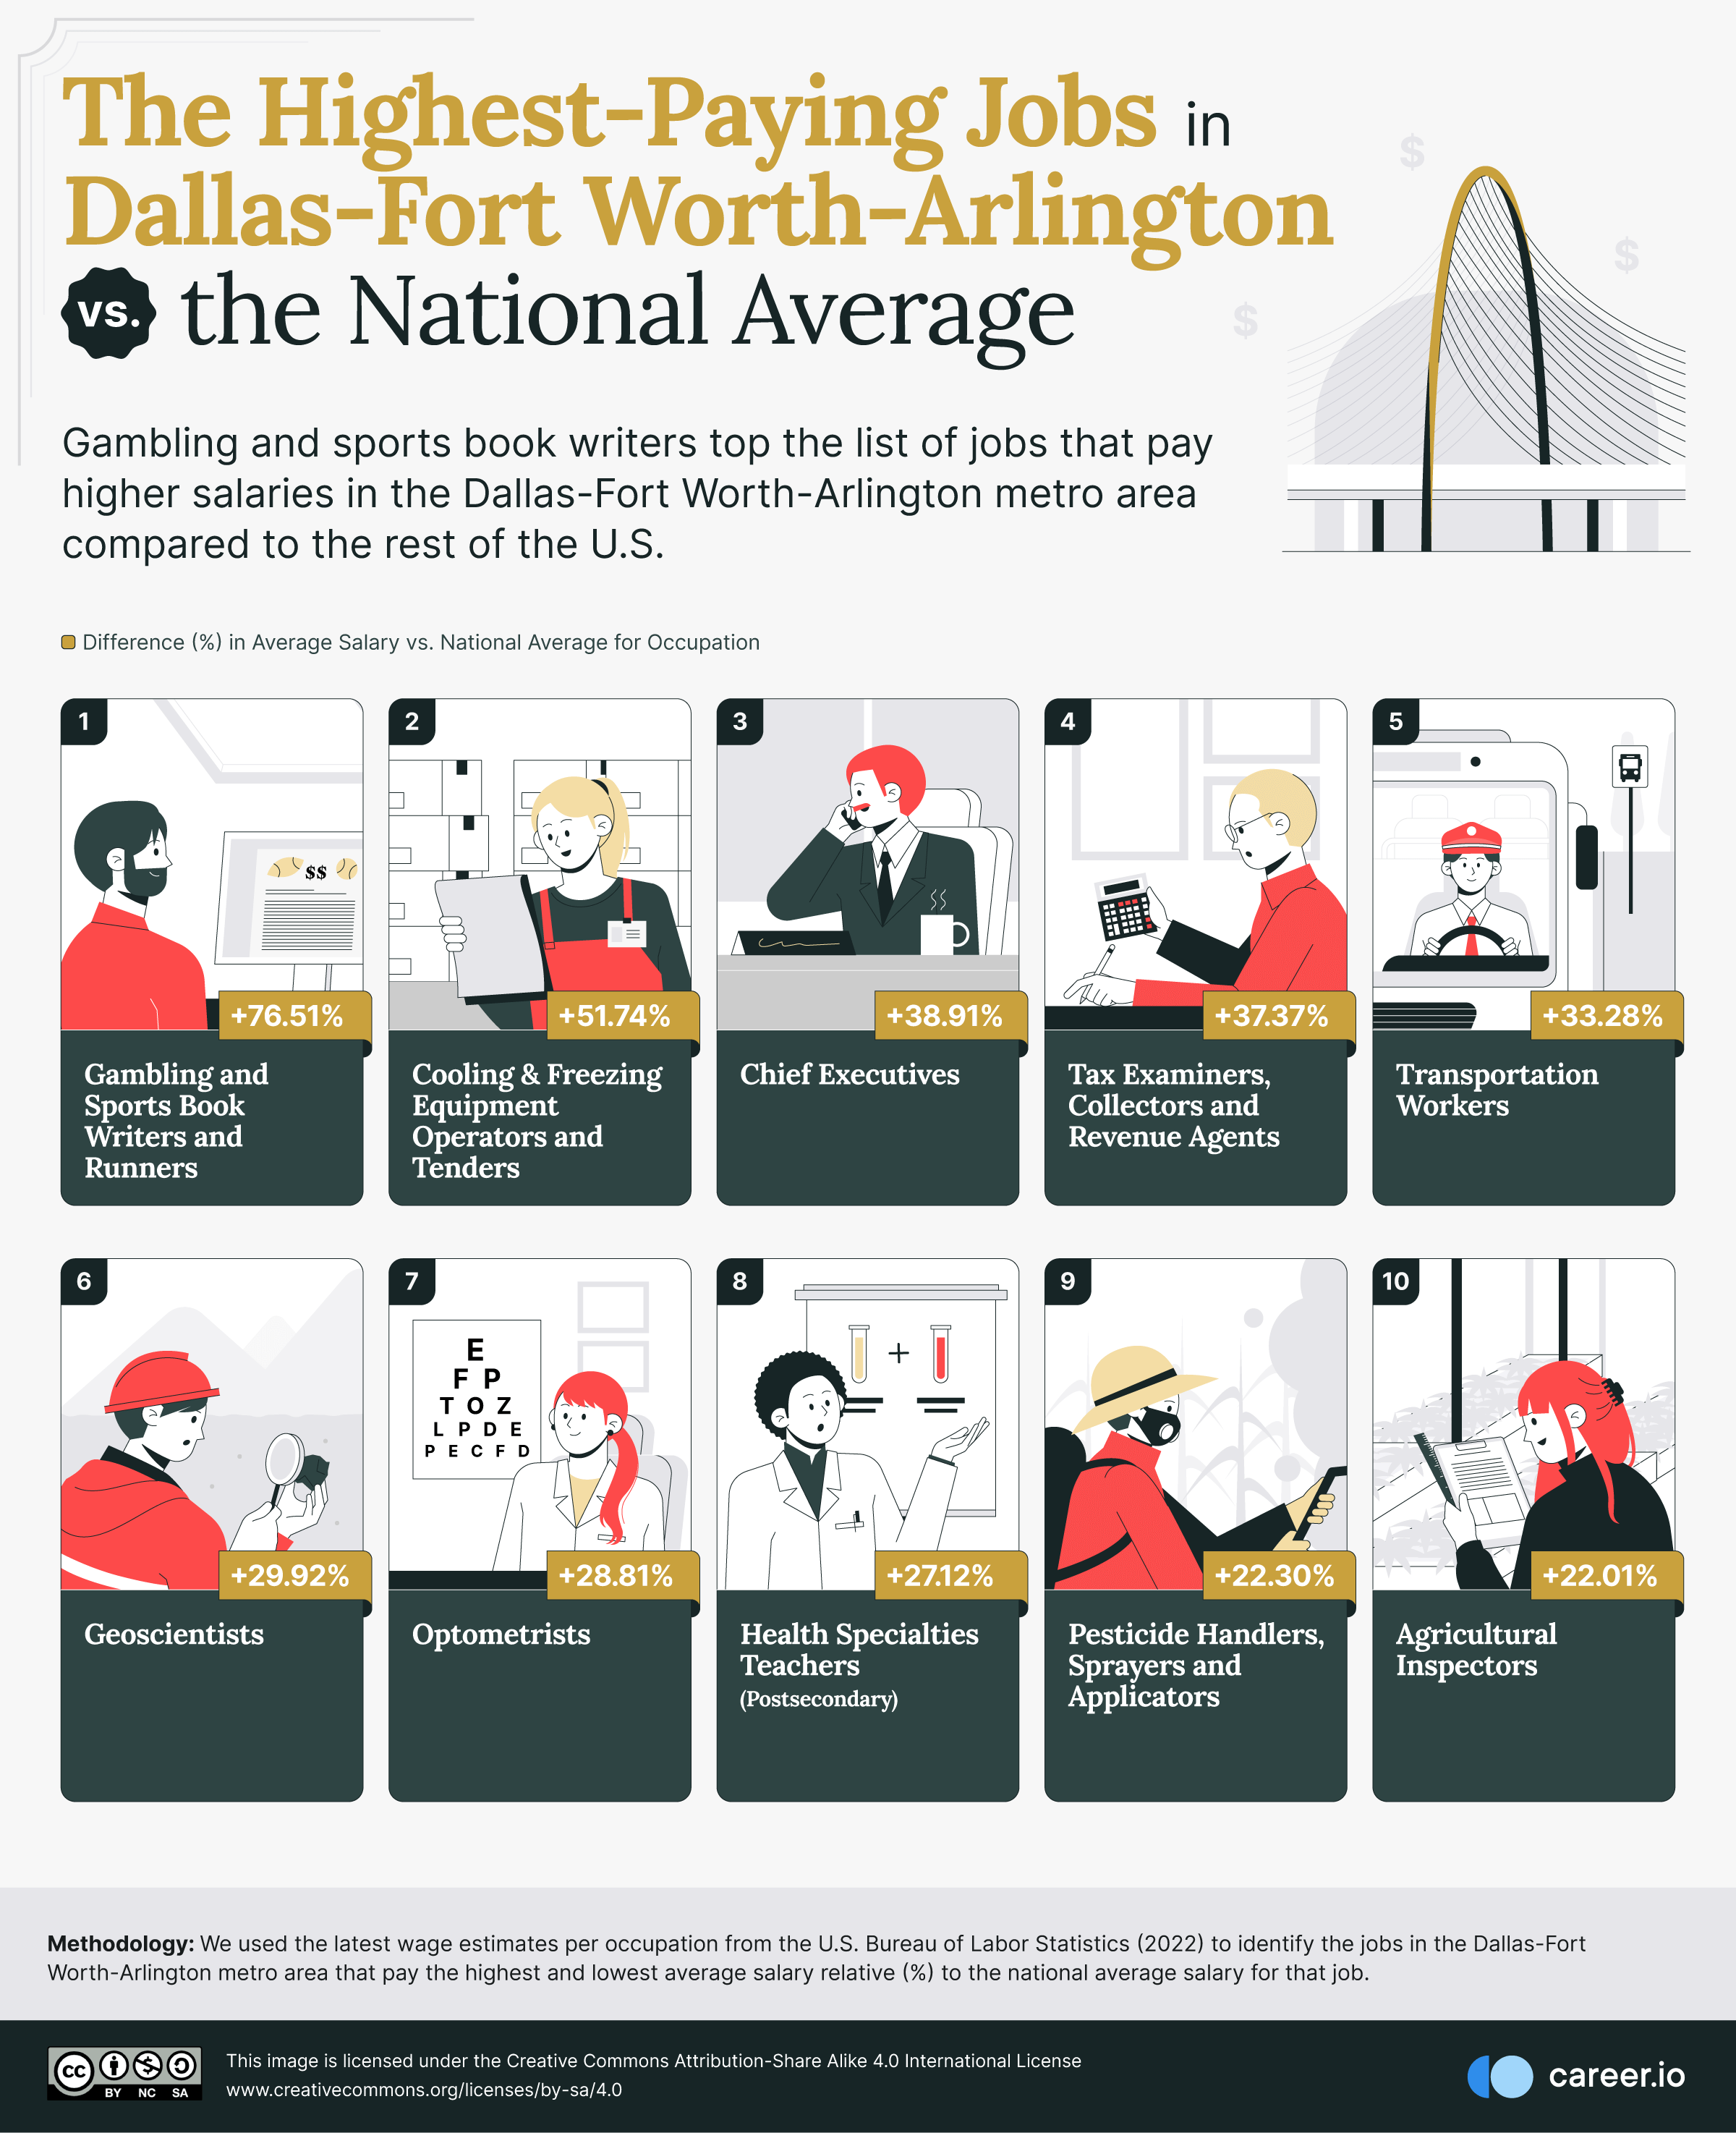 07_Highest-Paying-Job-in-DAL-FW-ARL-vs-the-National-Average